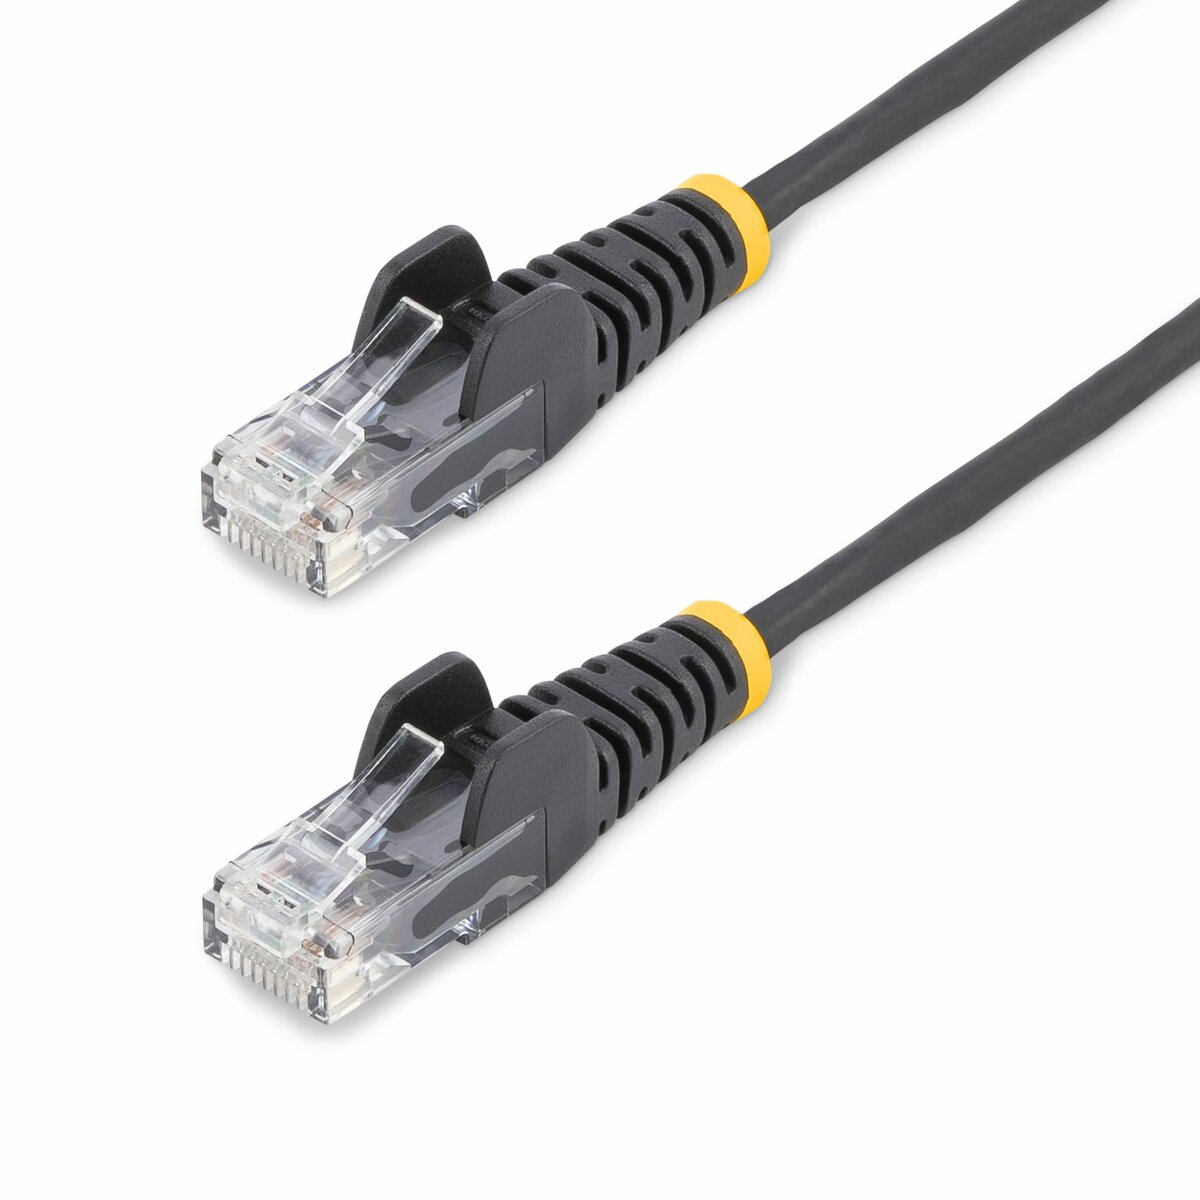 1m CAT6 Ethernet Cable - Blue CAT 6 Gigabit Ethernet Wire -650MHz 100W PoE  RJ45 UTP Network/Patch Cord Snagless w/Strain Relief Fluke Tested/Wiring is